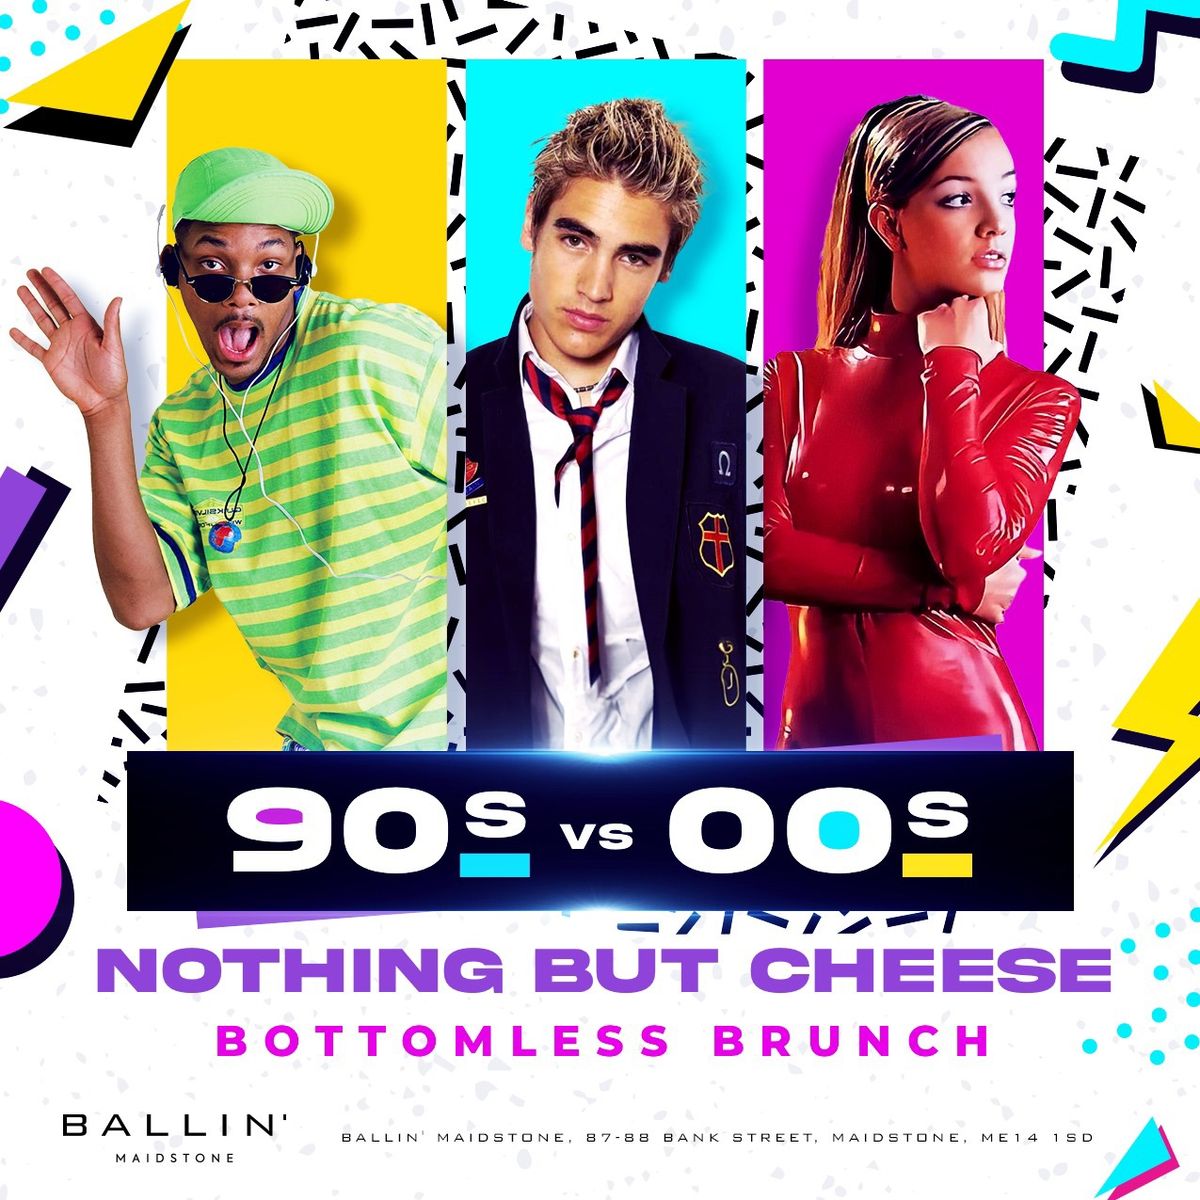 90s vs 00s Nothing But Cheese Bottomless Brunch 